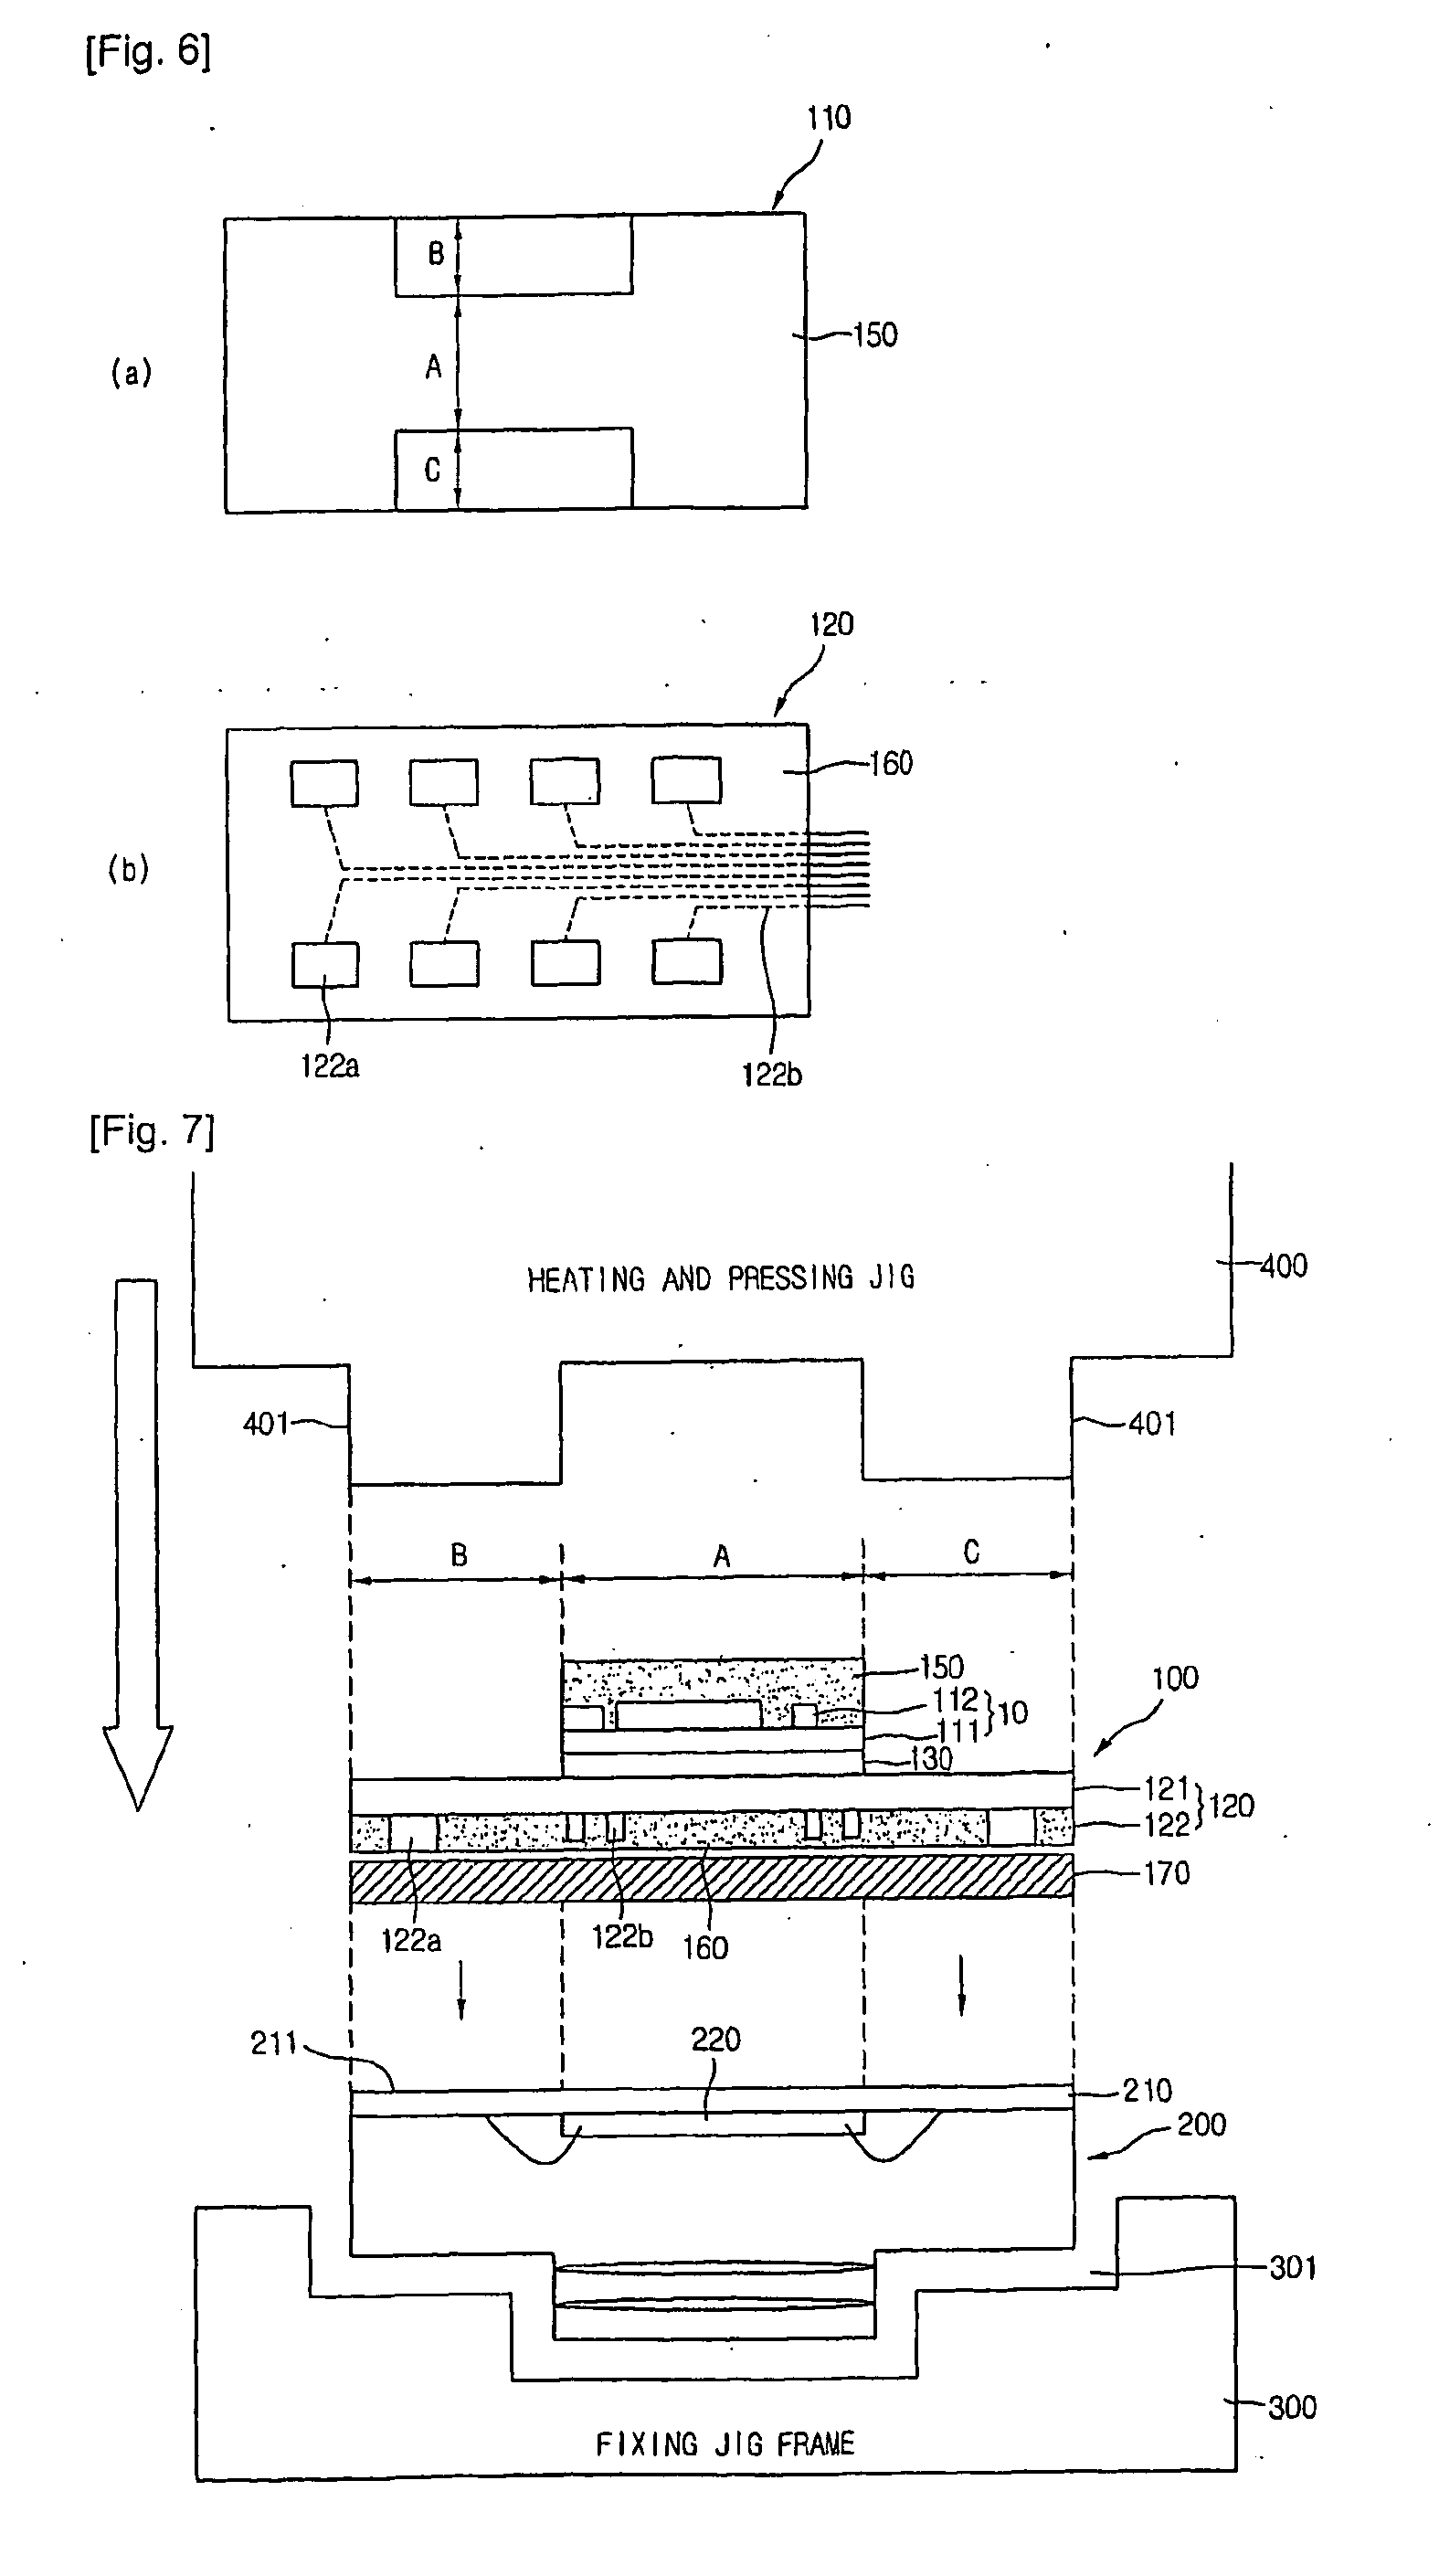 Multi-Layer Flexible Printed Circuit Board and Method For Manufacturing the Same